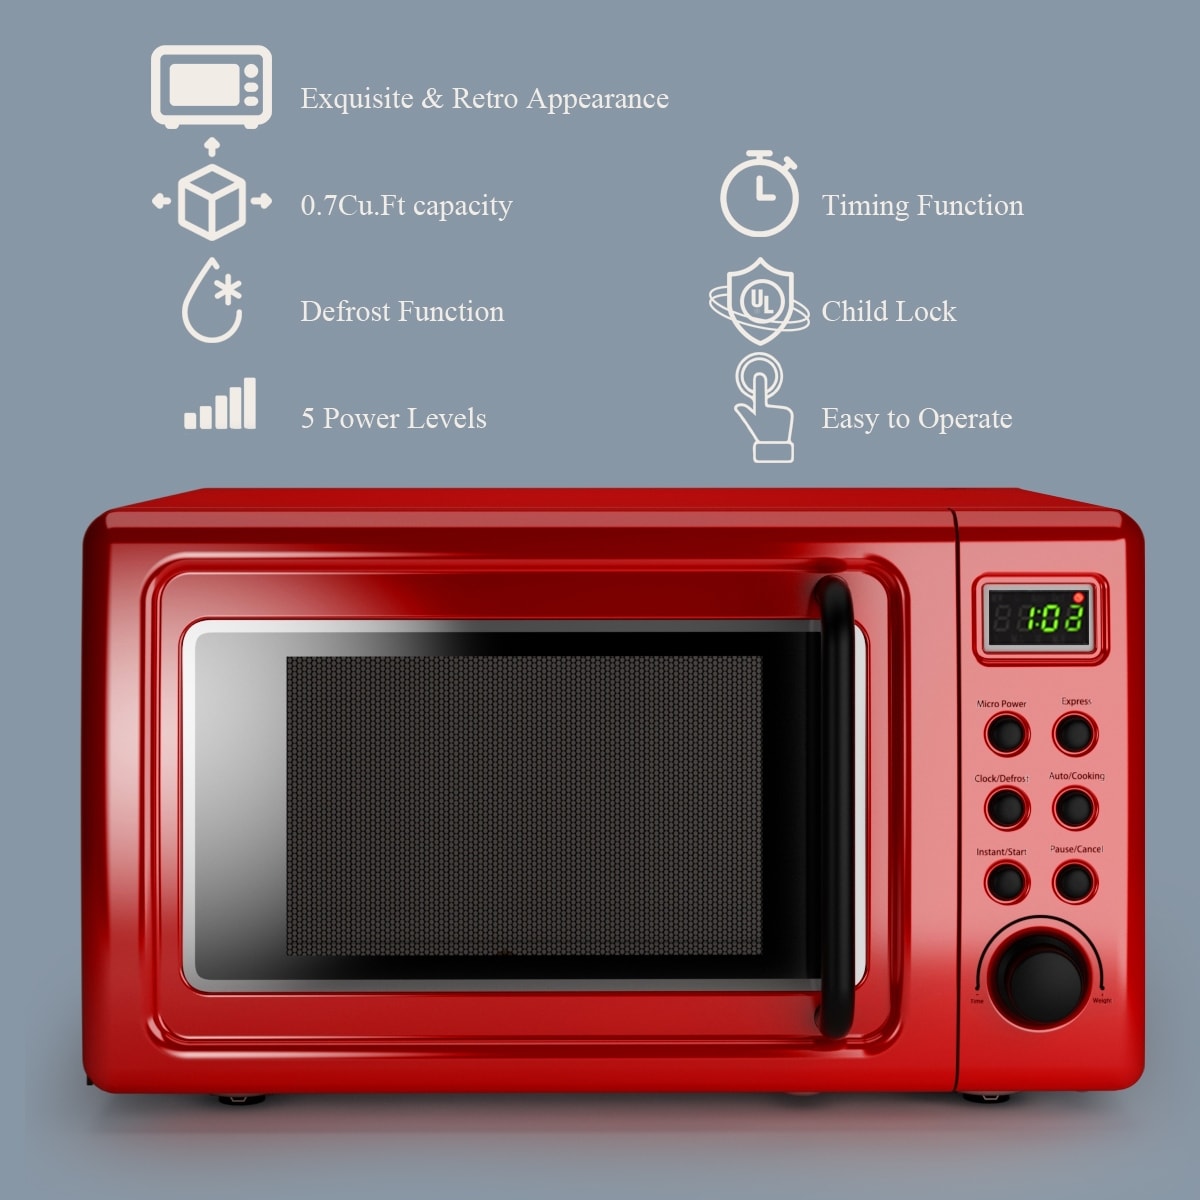 RED Details about   Countertop Microwave Stainless Steel Home Office LED Oven 900W 0.9 Cu Ft 